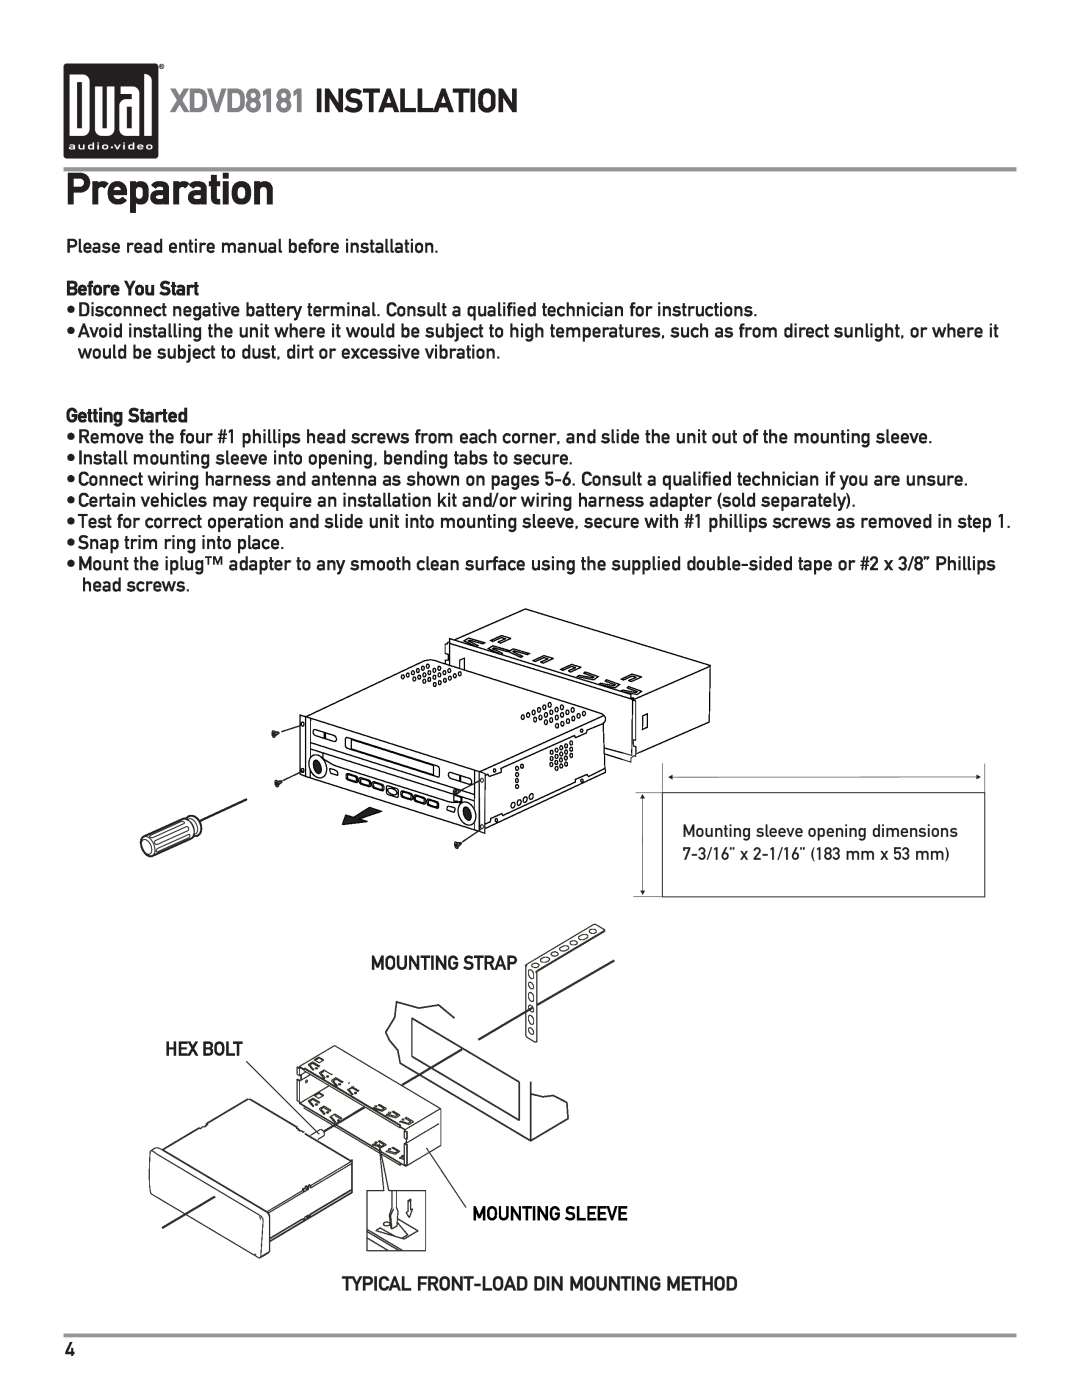 Dual Preparation, XDVD8181 INSTALLATION, Before You Start, Getting Started, Typical Front-Loaddin Mounting Method 